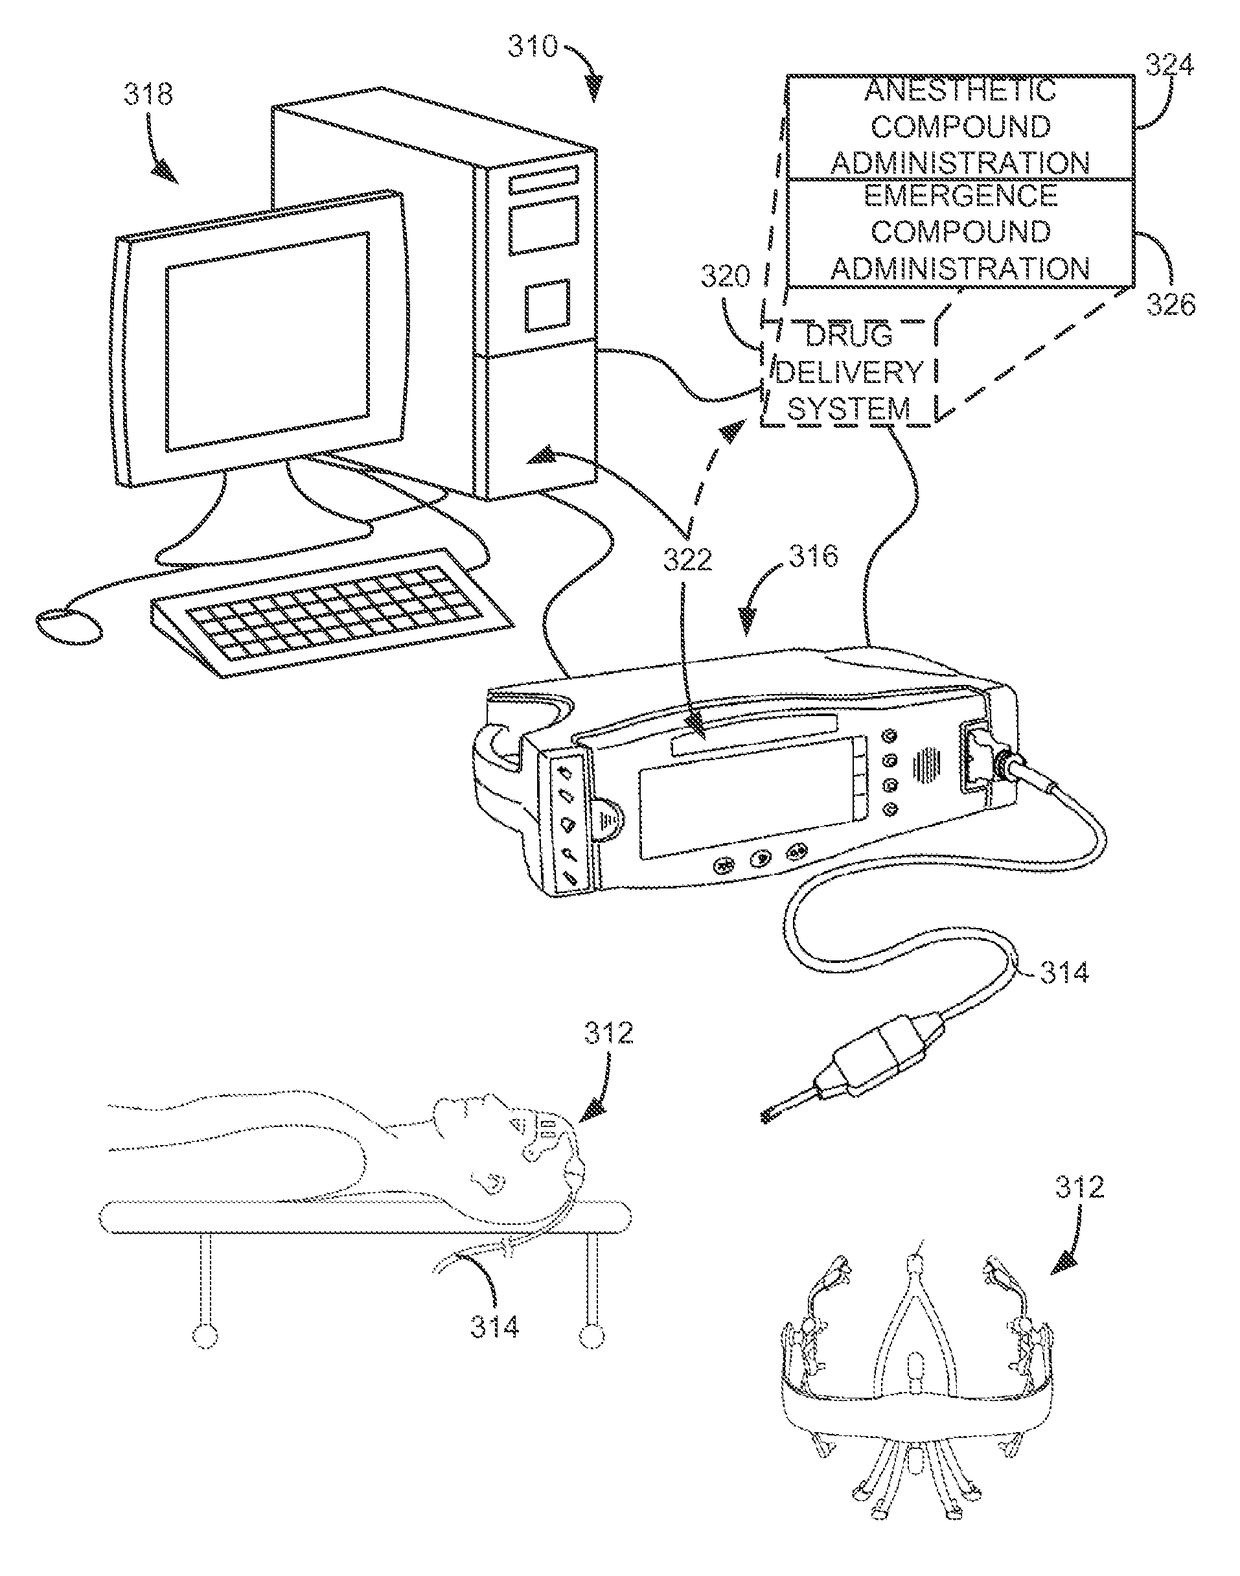 Systems and methods for predicting arousal to consciousness during general anesthesia and sedation